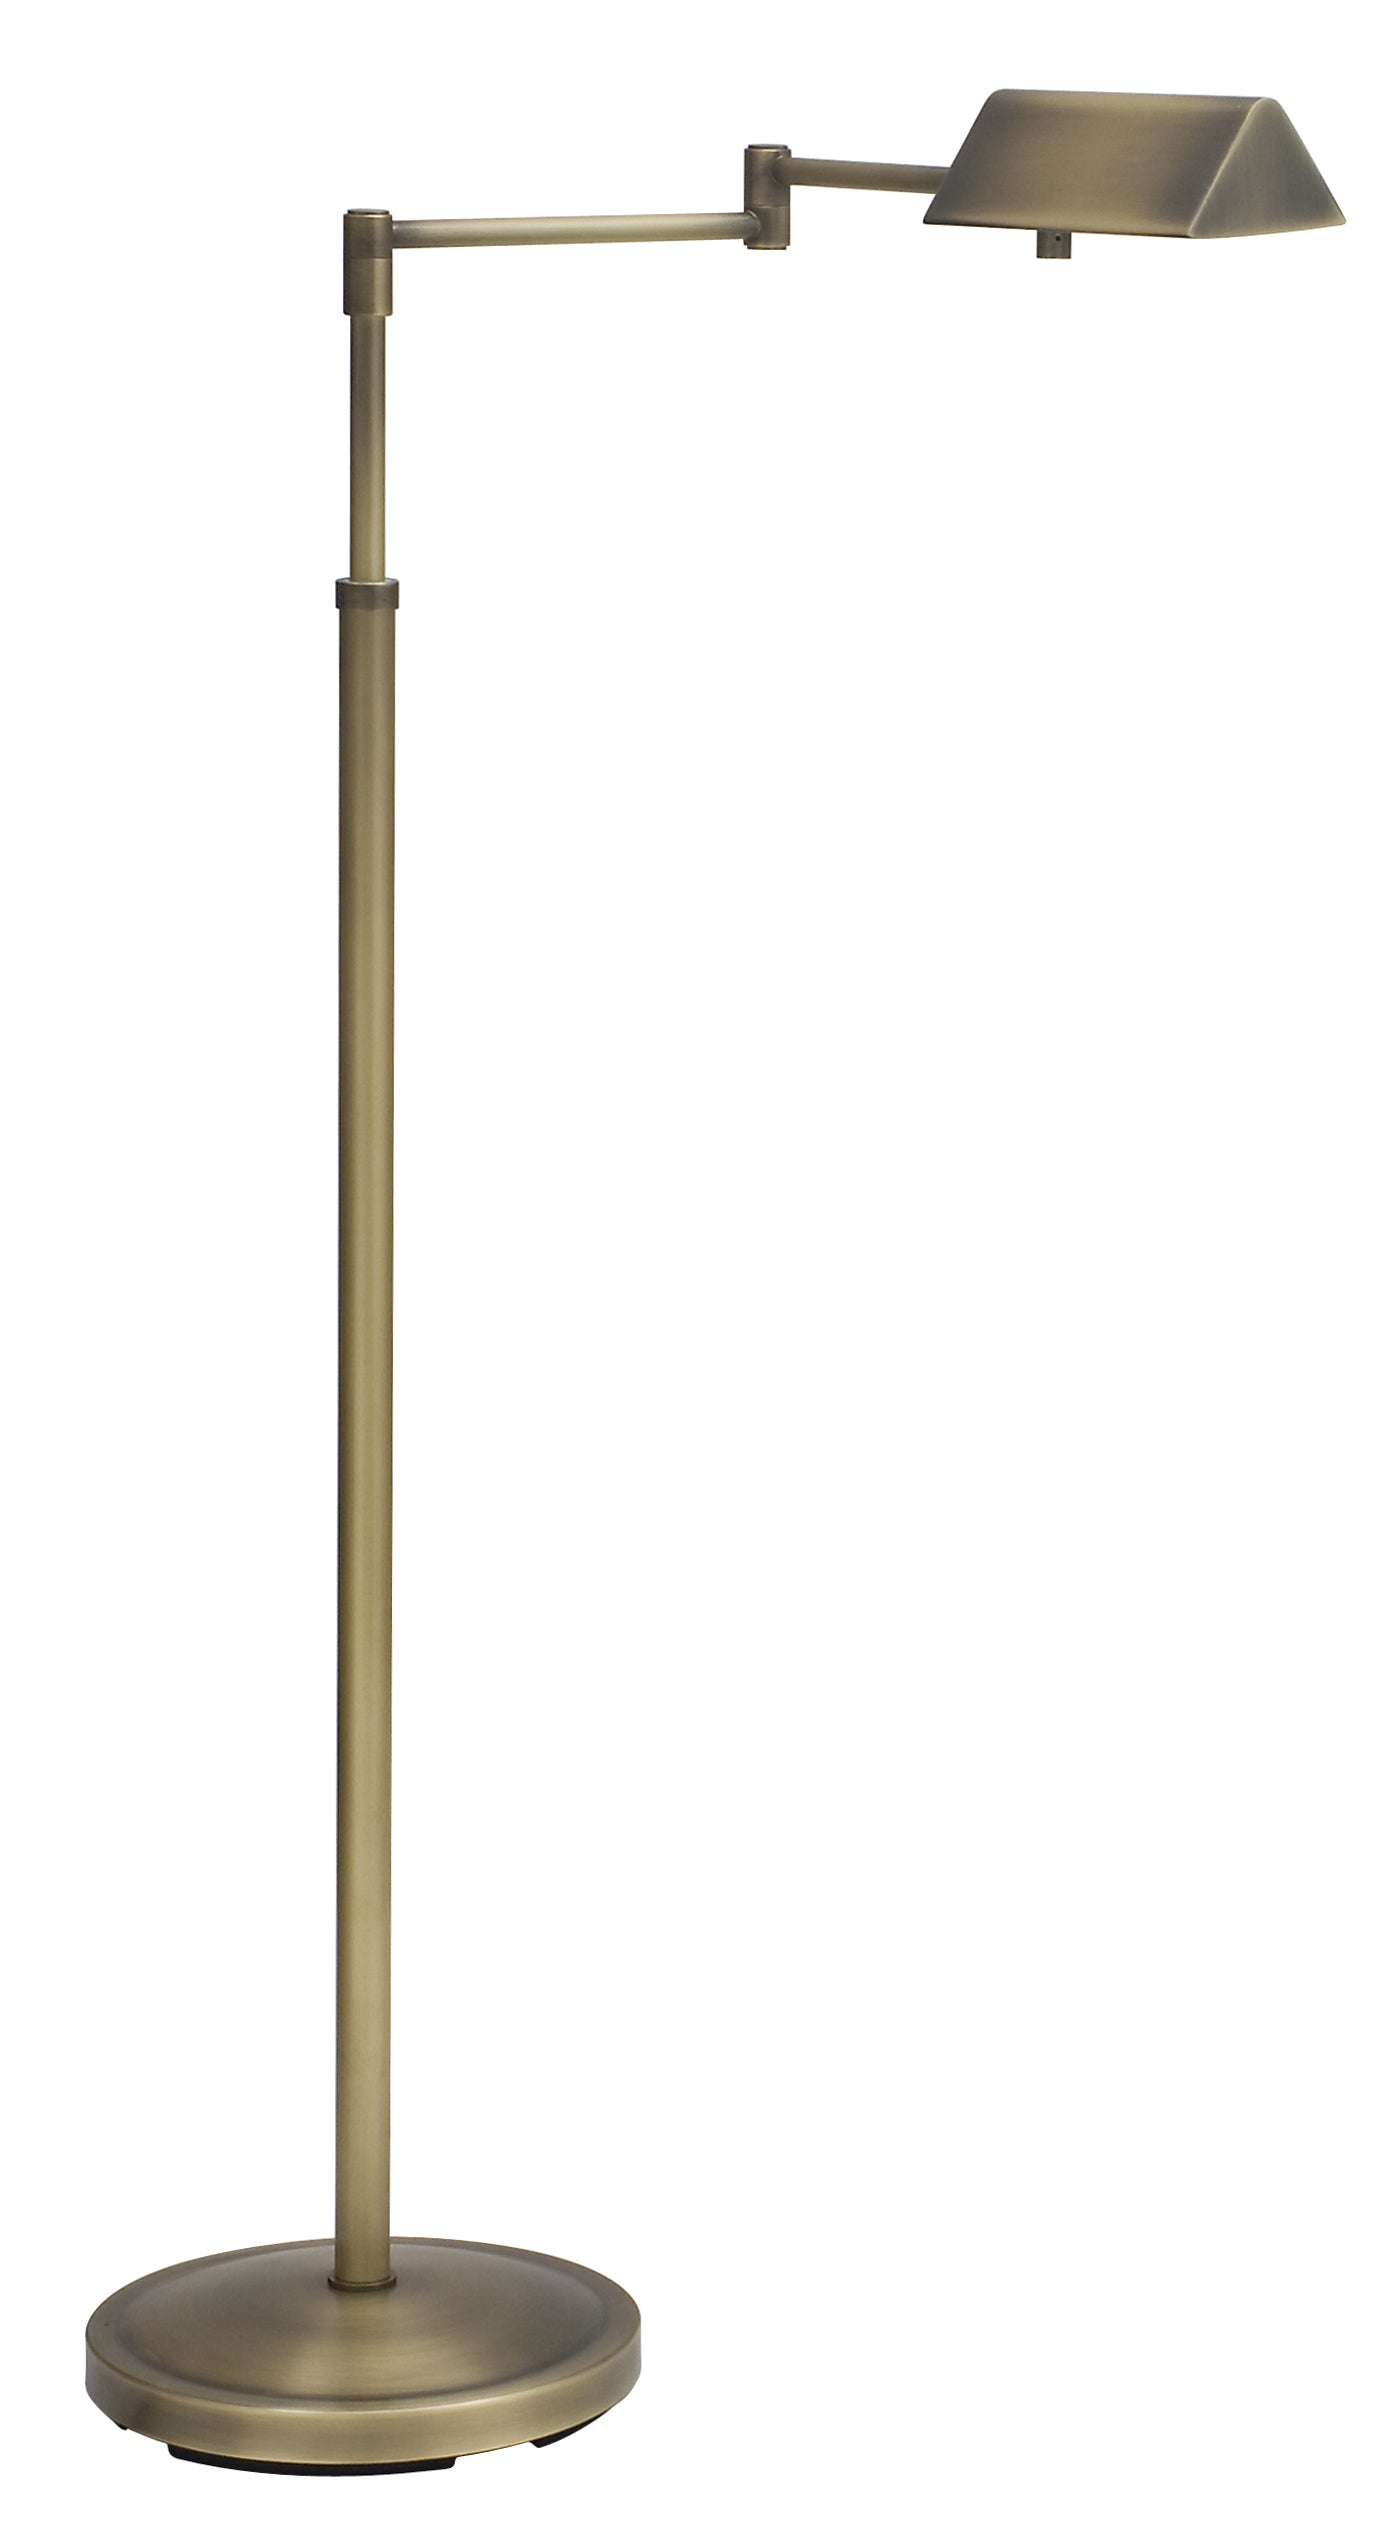 House of Troy Pinnacle Antique Brass Floor Lamp PIN400-AB